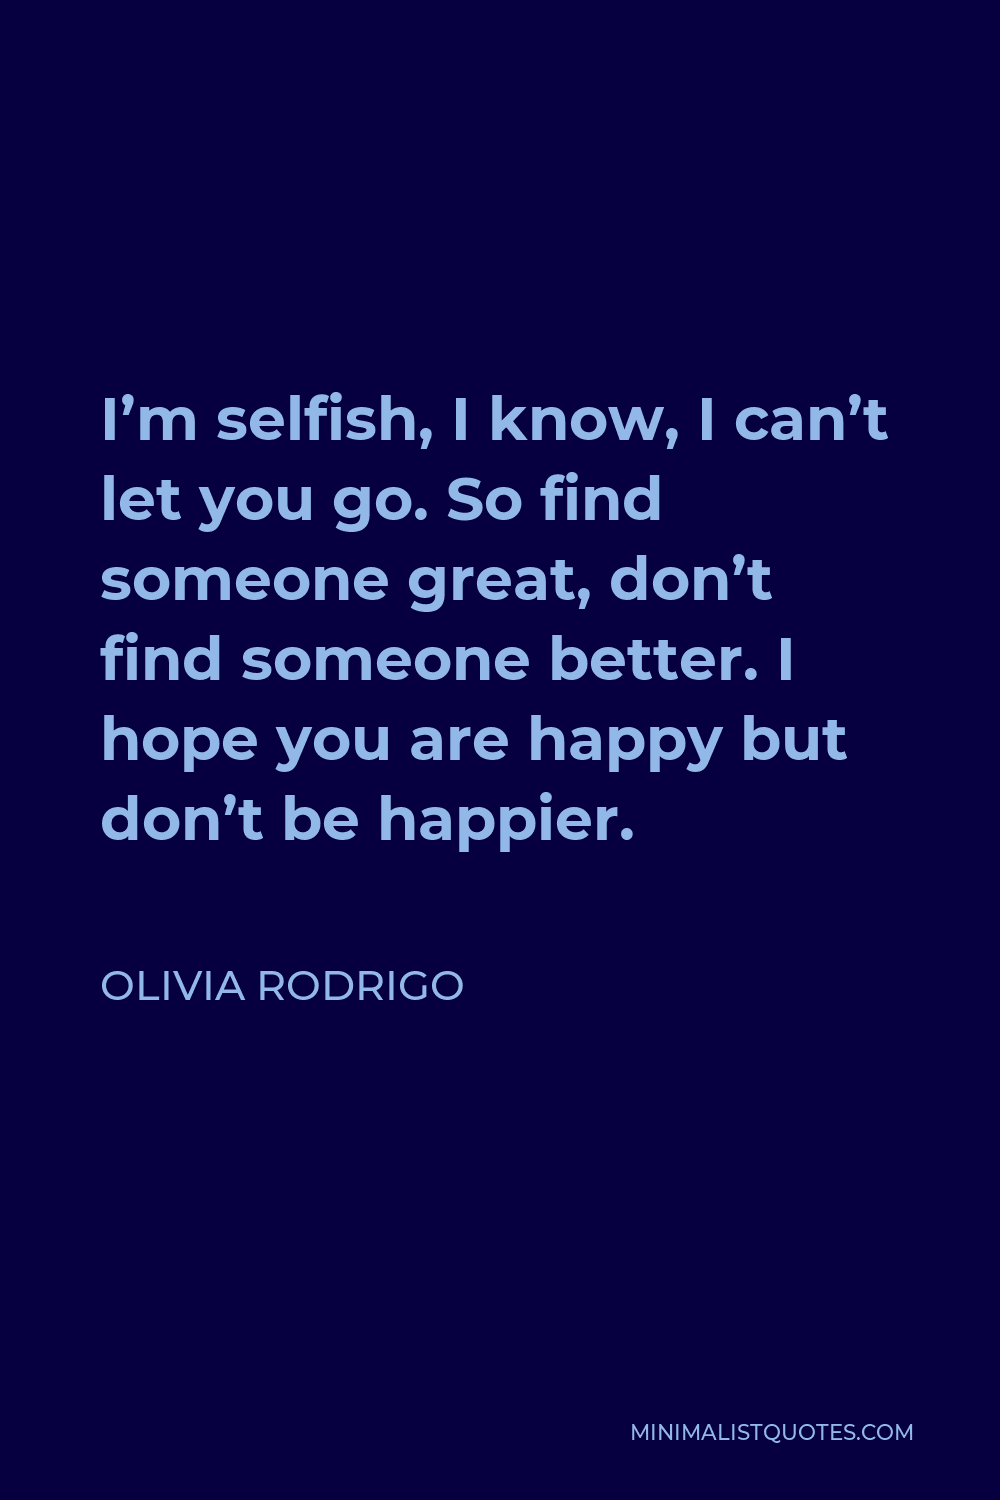 Olivia Rodrigo Quote - I’m selfish, I know, I can’t let you go. So find someone great, don’t find someone better. I hope you are happy but don’t be happier.